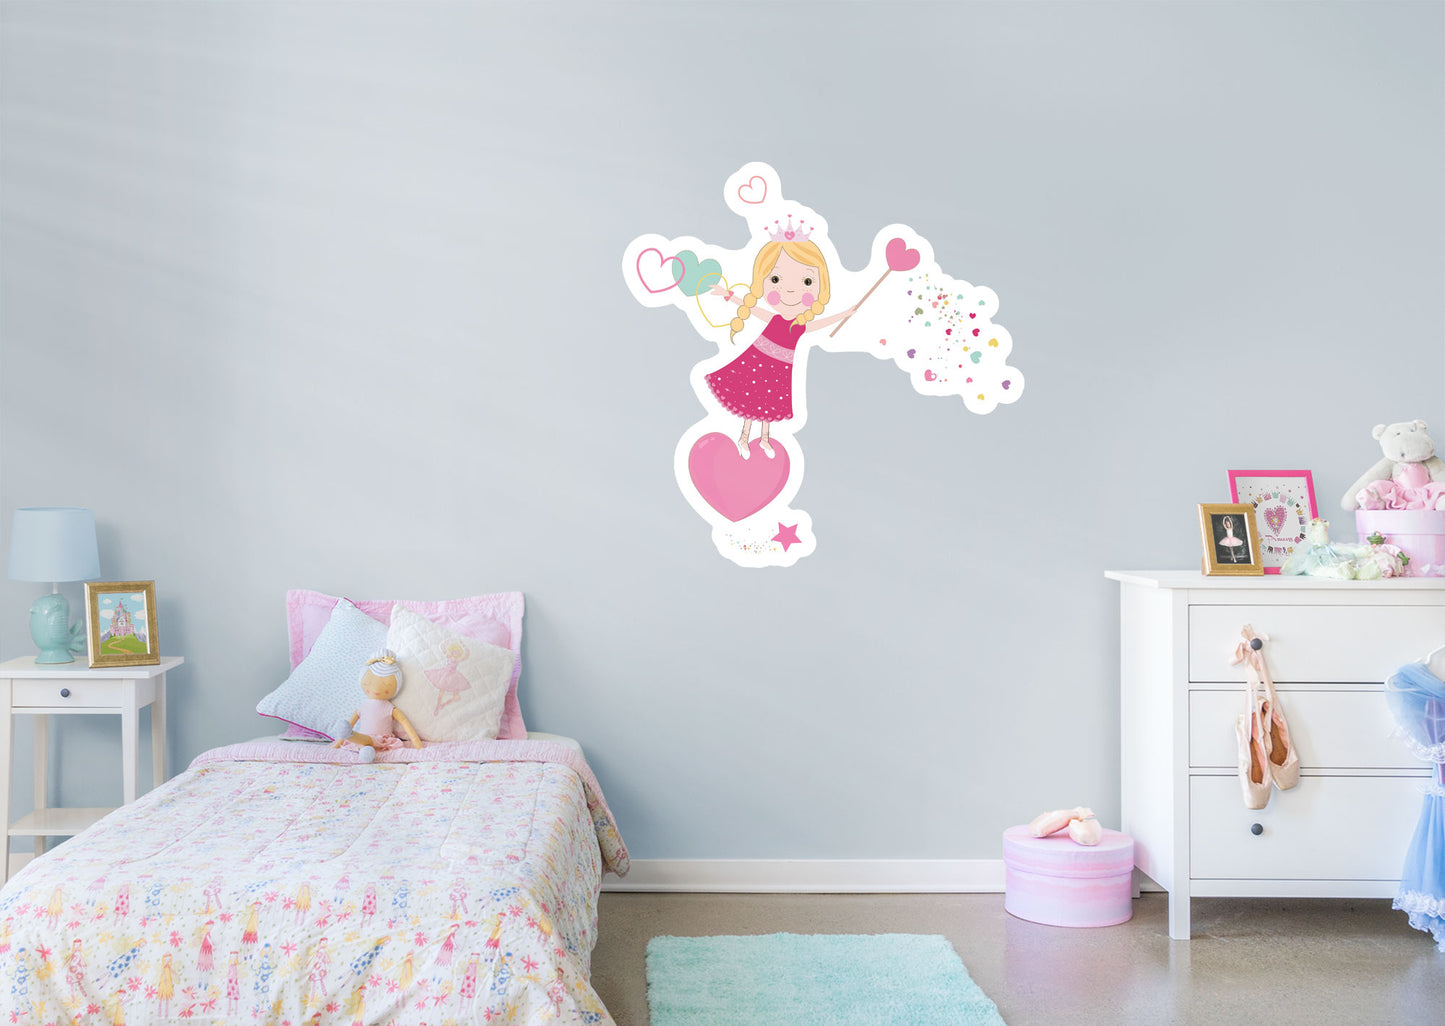 Nursery:  Hearts Icon        -   Removable     Adhesive Decal